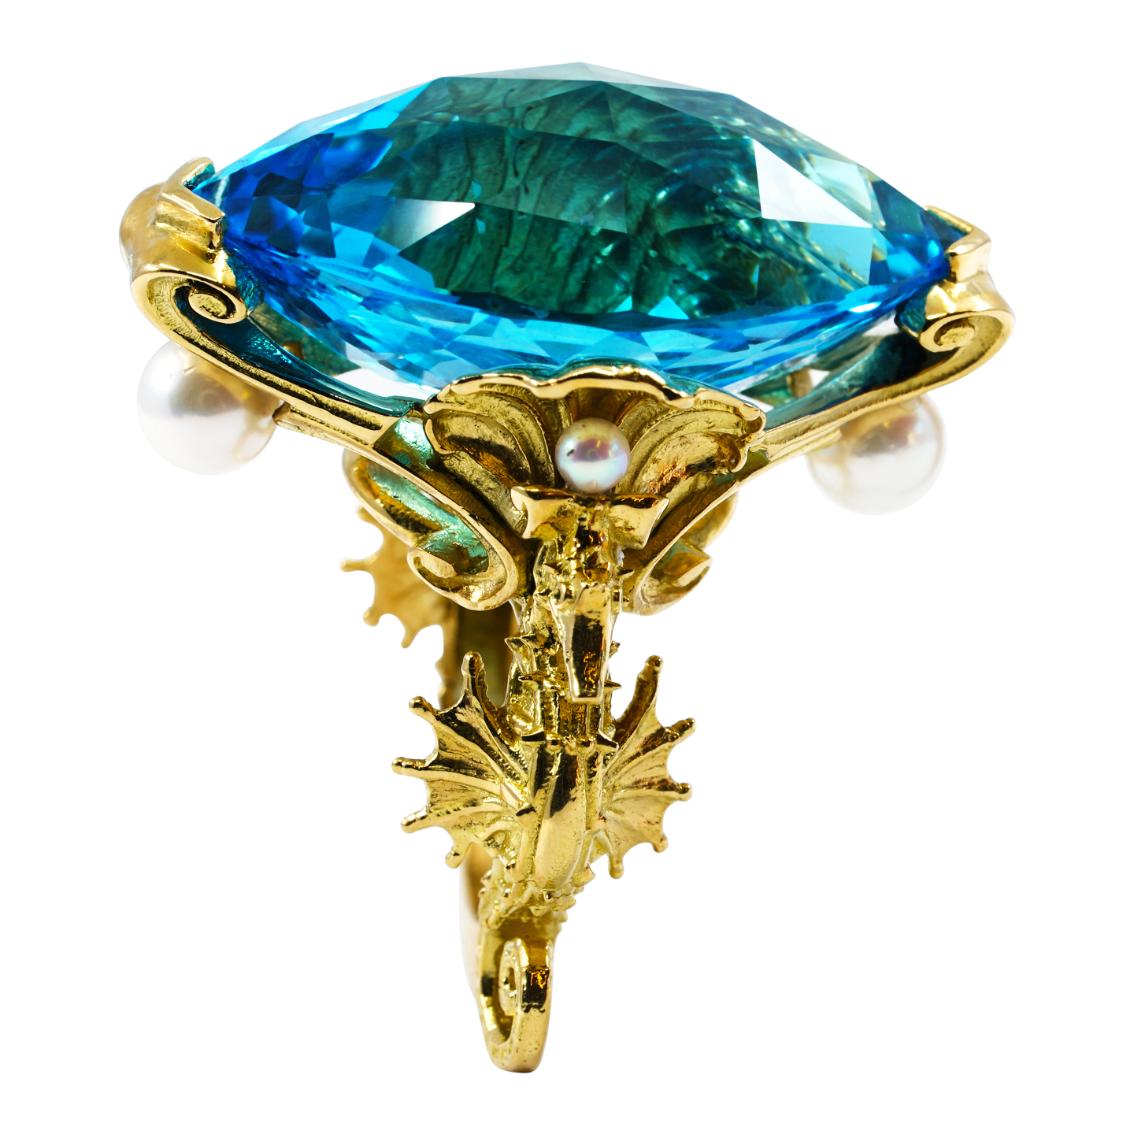  Swiss Blue Topaz and Akoya Pearls gold ring  For Sale 3